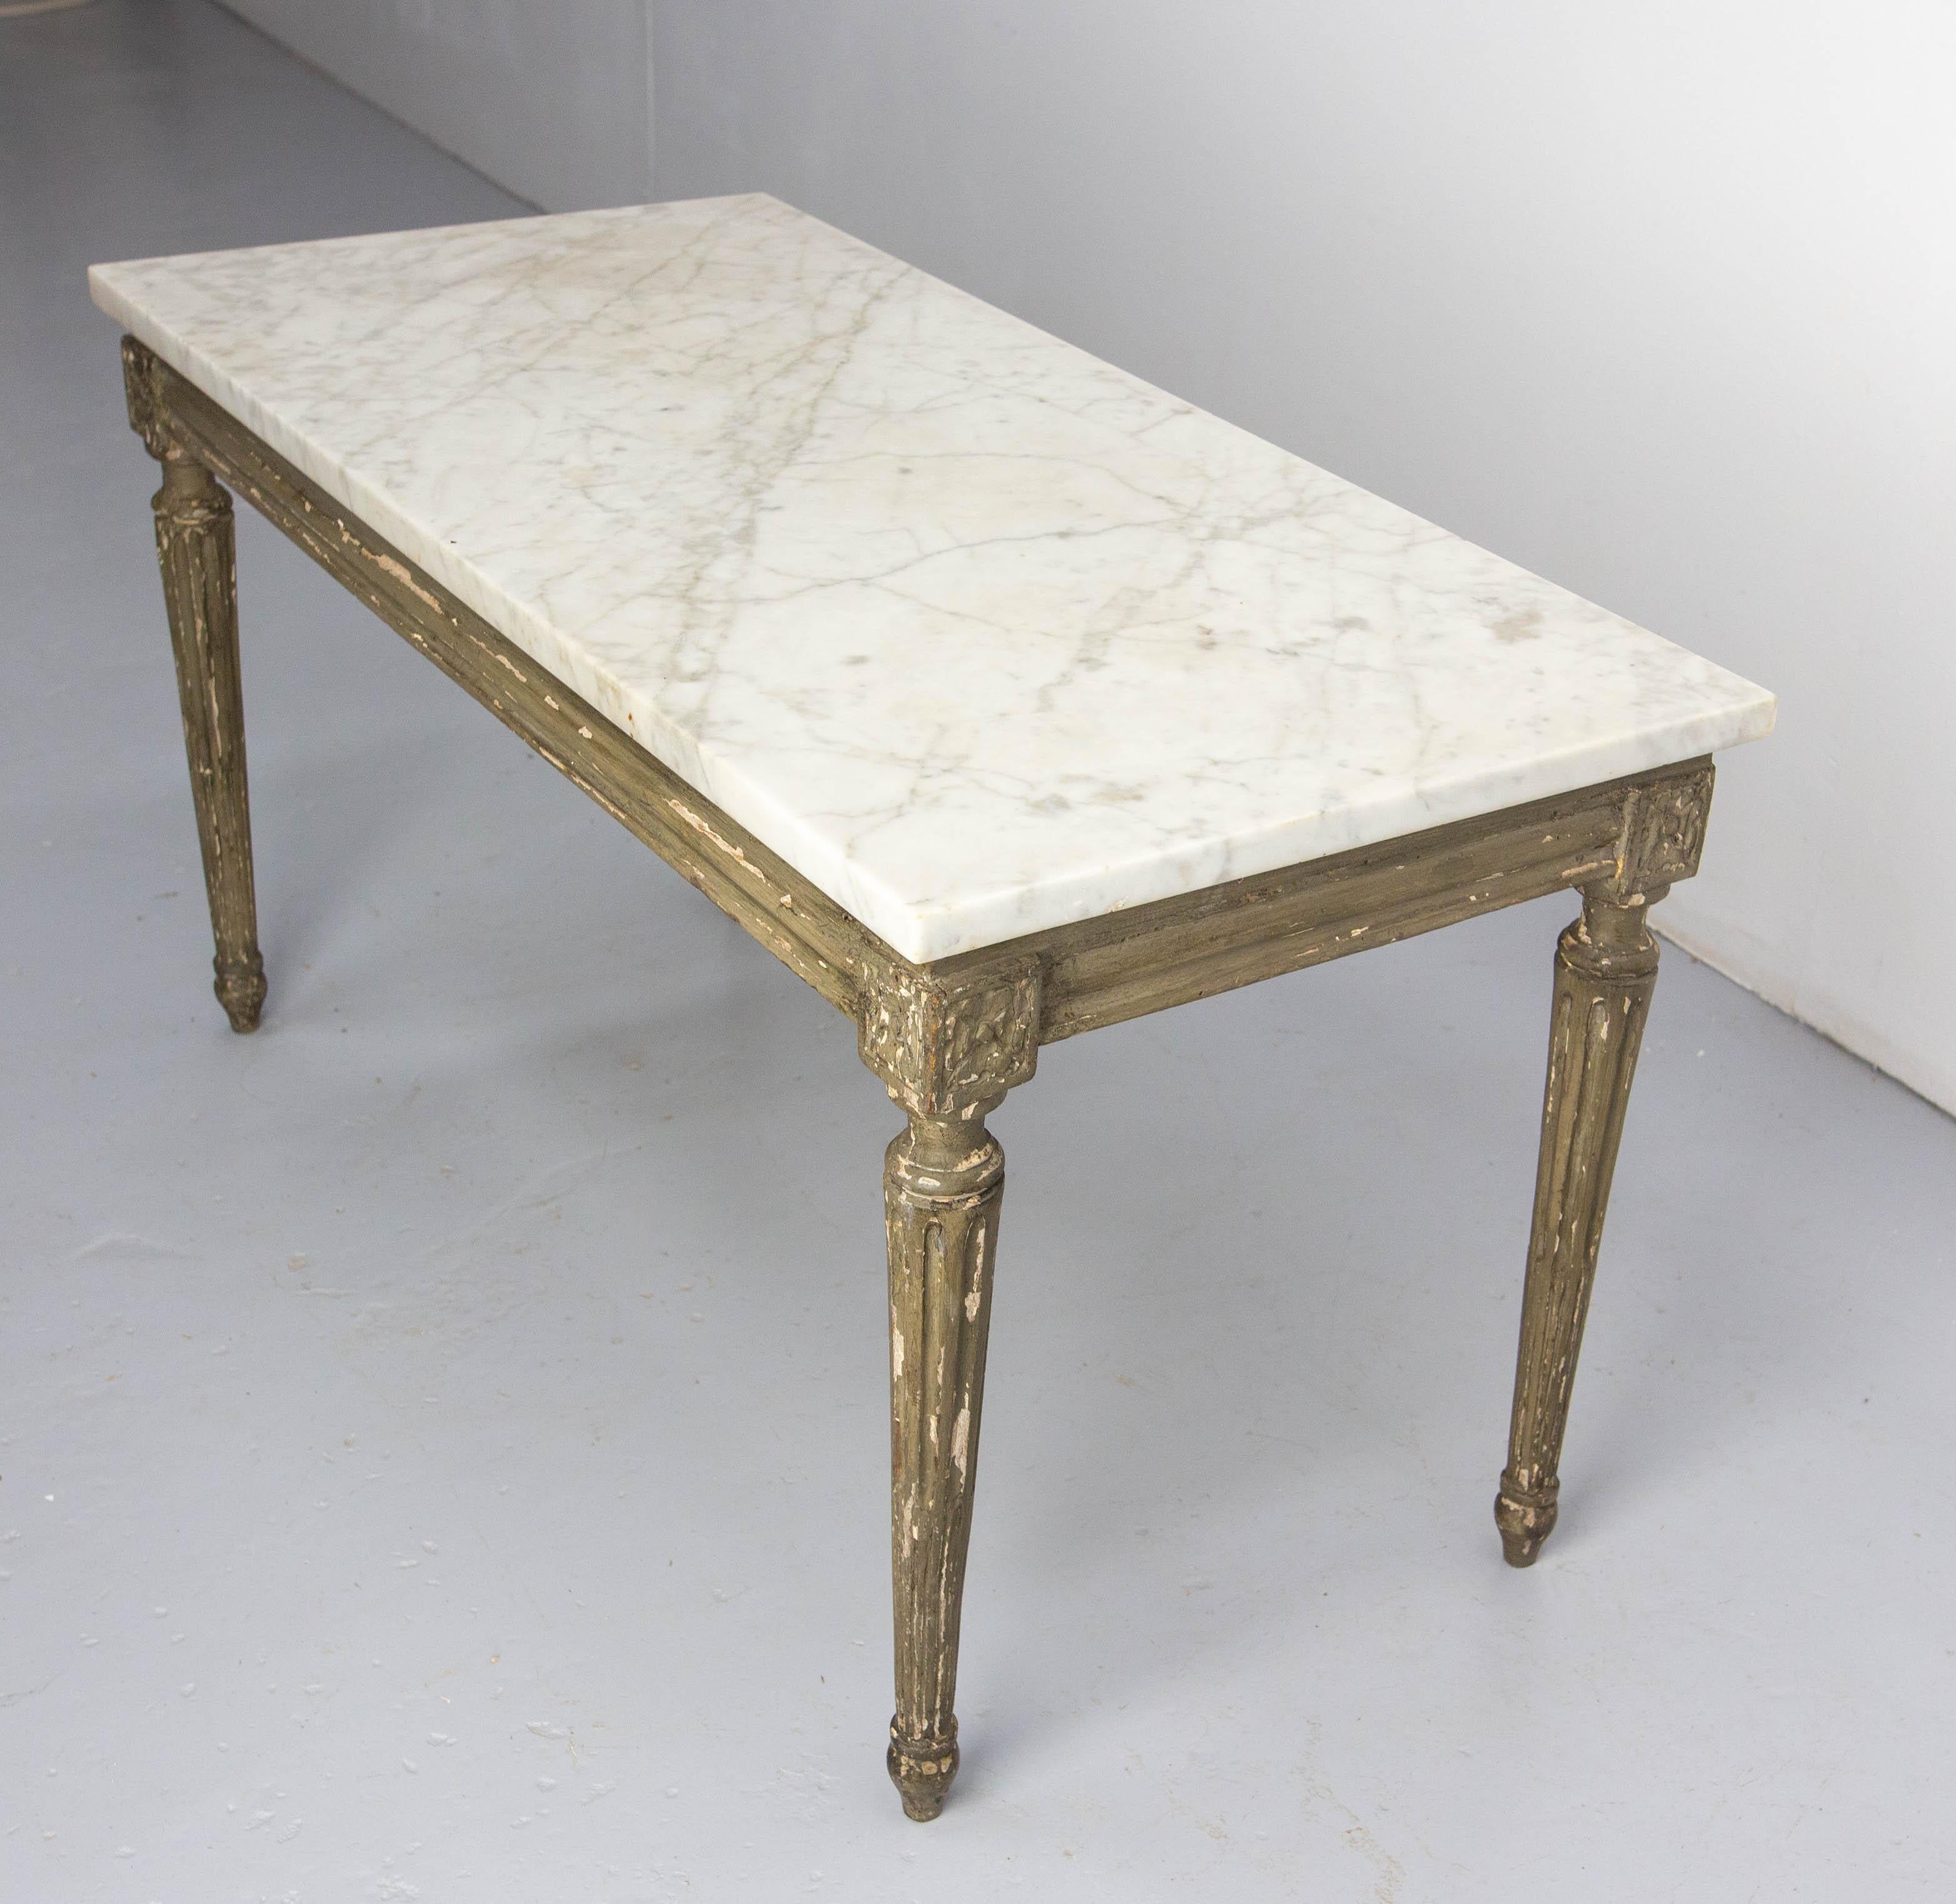 French Louis XVI Painted Wood & Marble Top Coffee Table, late 19th Century For Sale 1